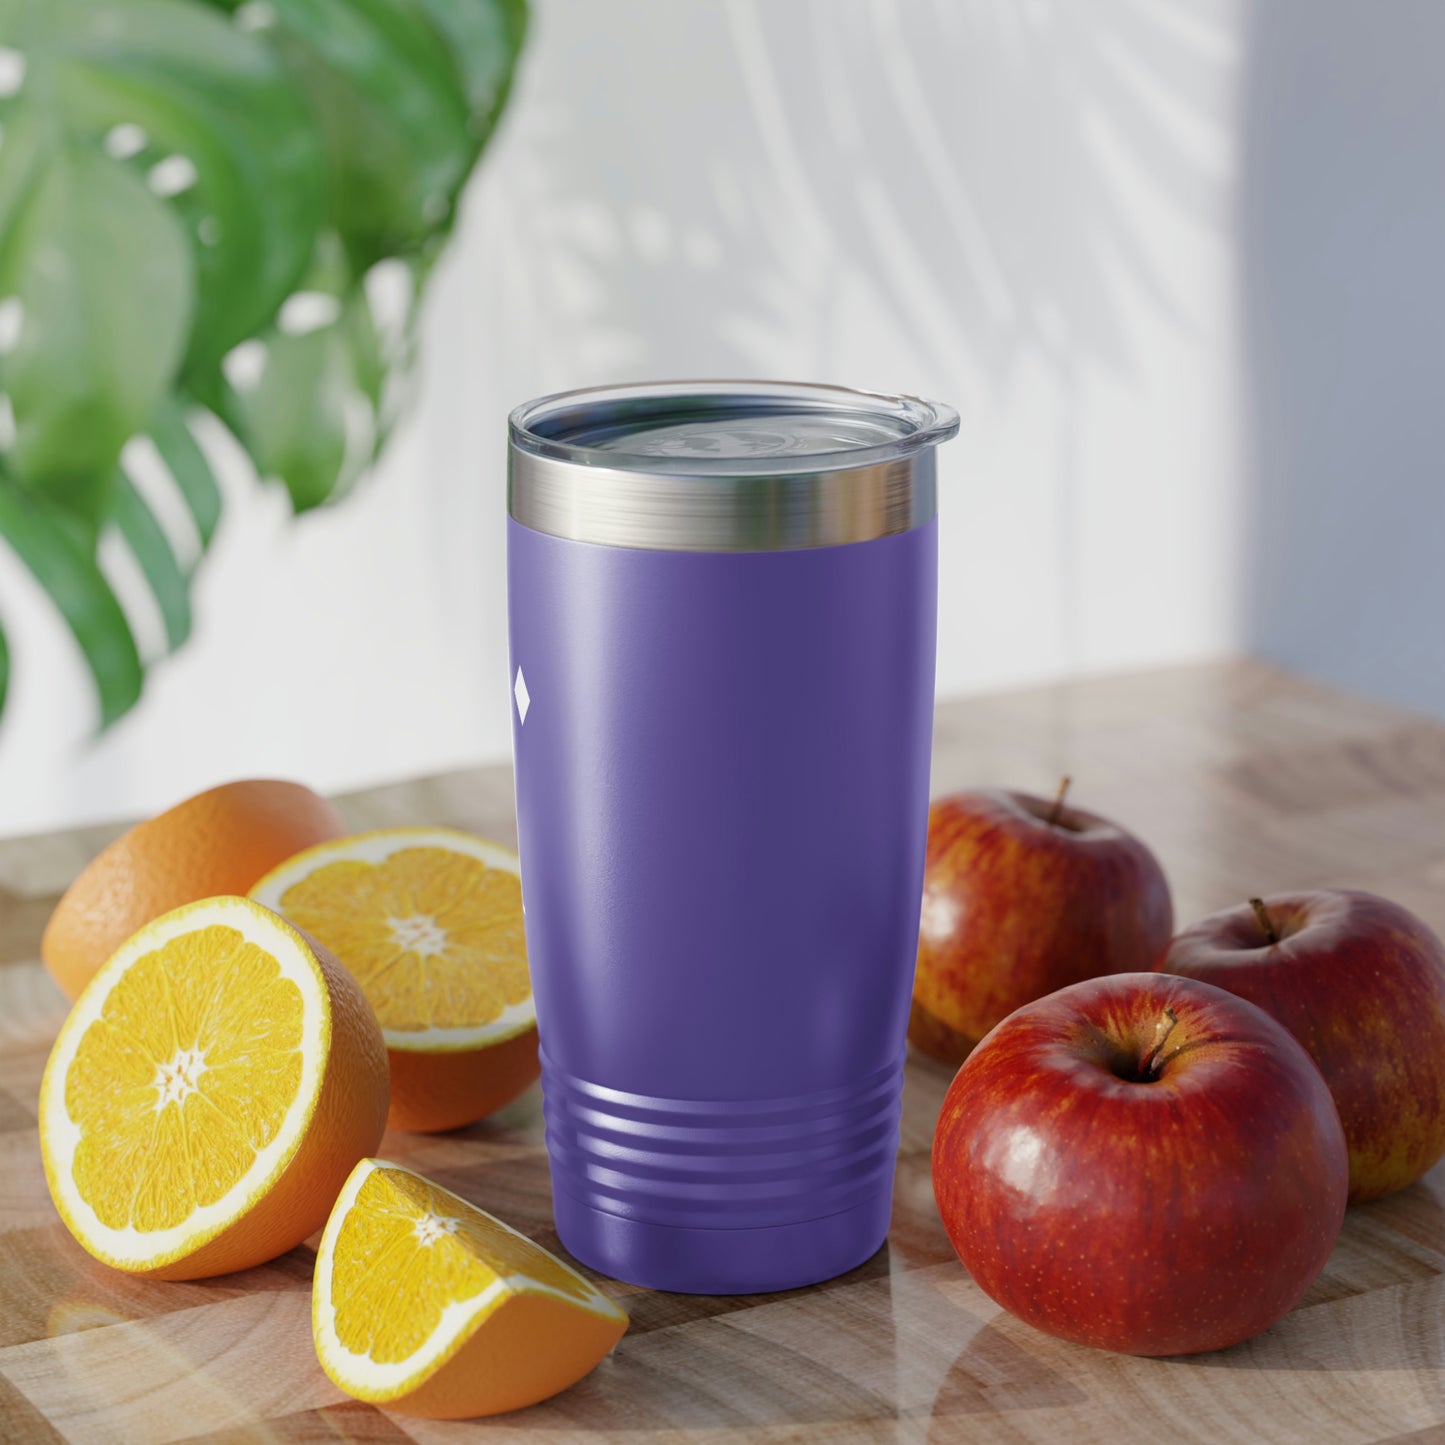 Retro Design Ringneck Tumbler. Drinkware and Accessories, Designed by a Teen in USA with our Custom Logo. Available only at ThirstFull.com. Prices start from $5.99 USD